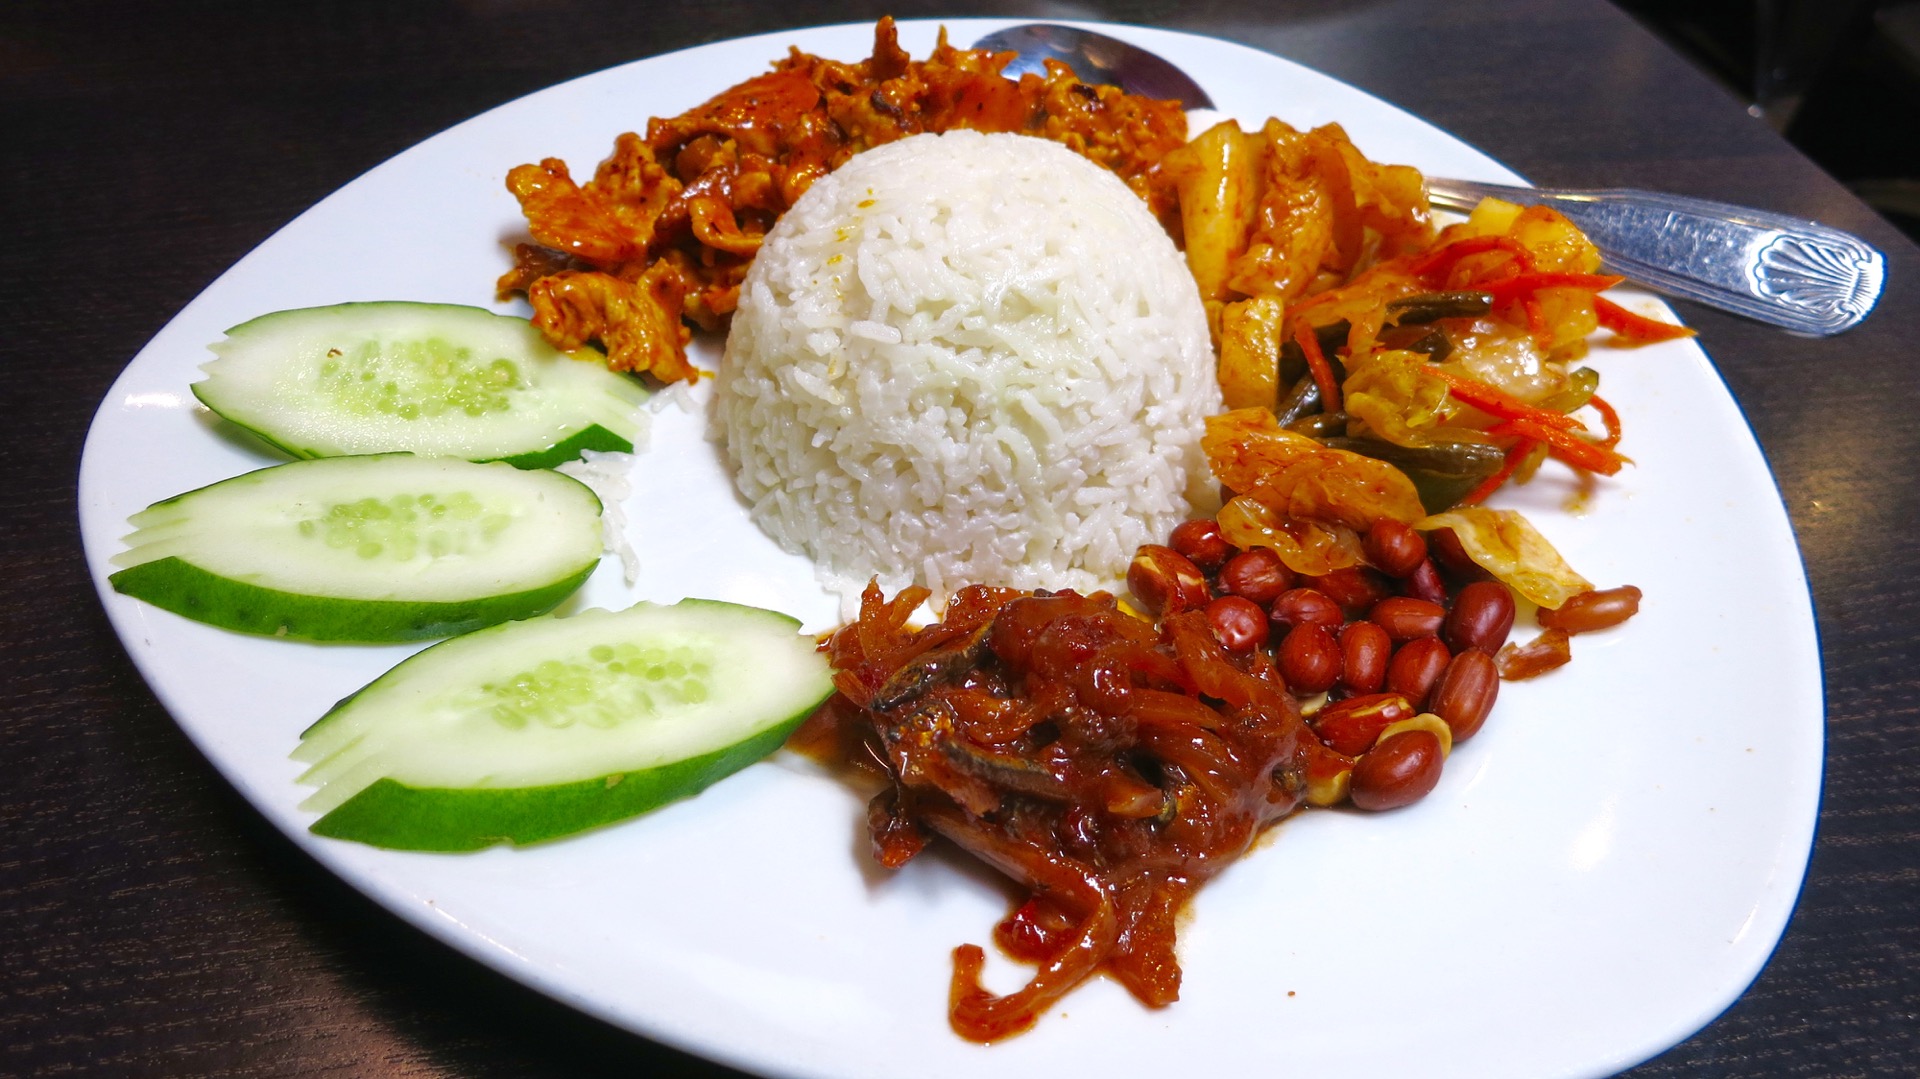 Chilli Padi's nasi lemak is a spicy melange of salty, fishy and savory flavors.